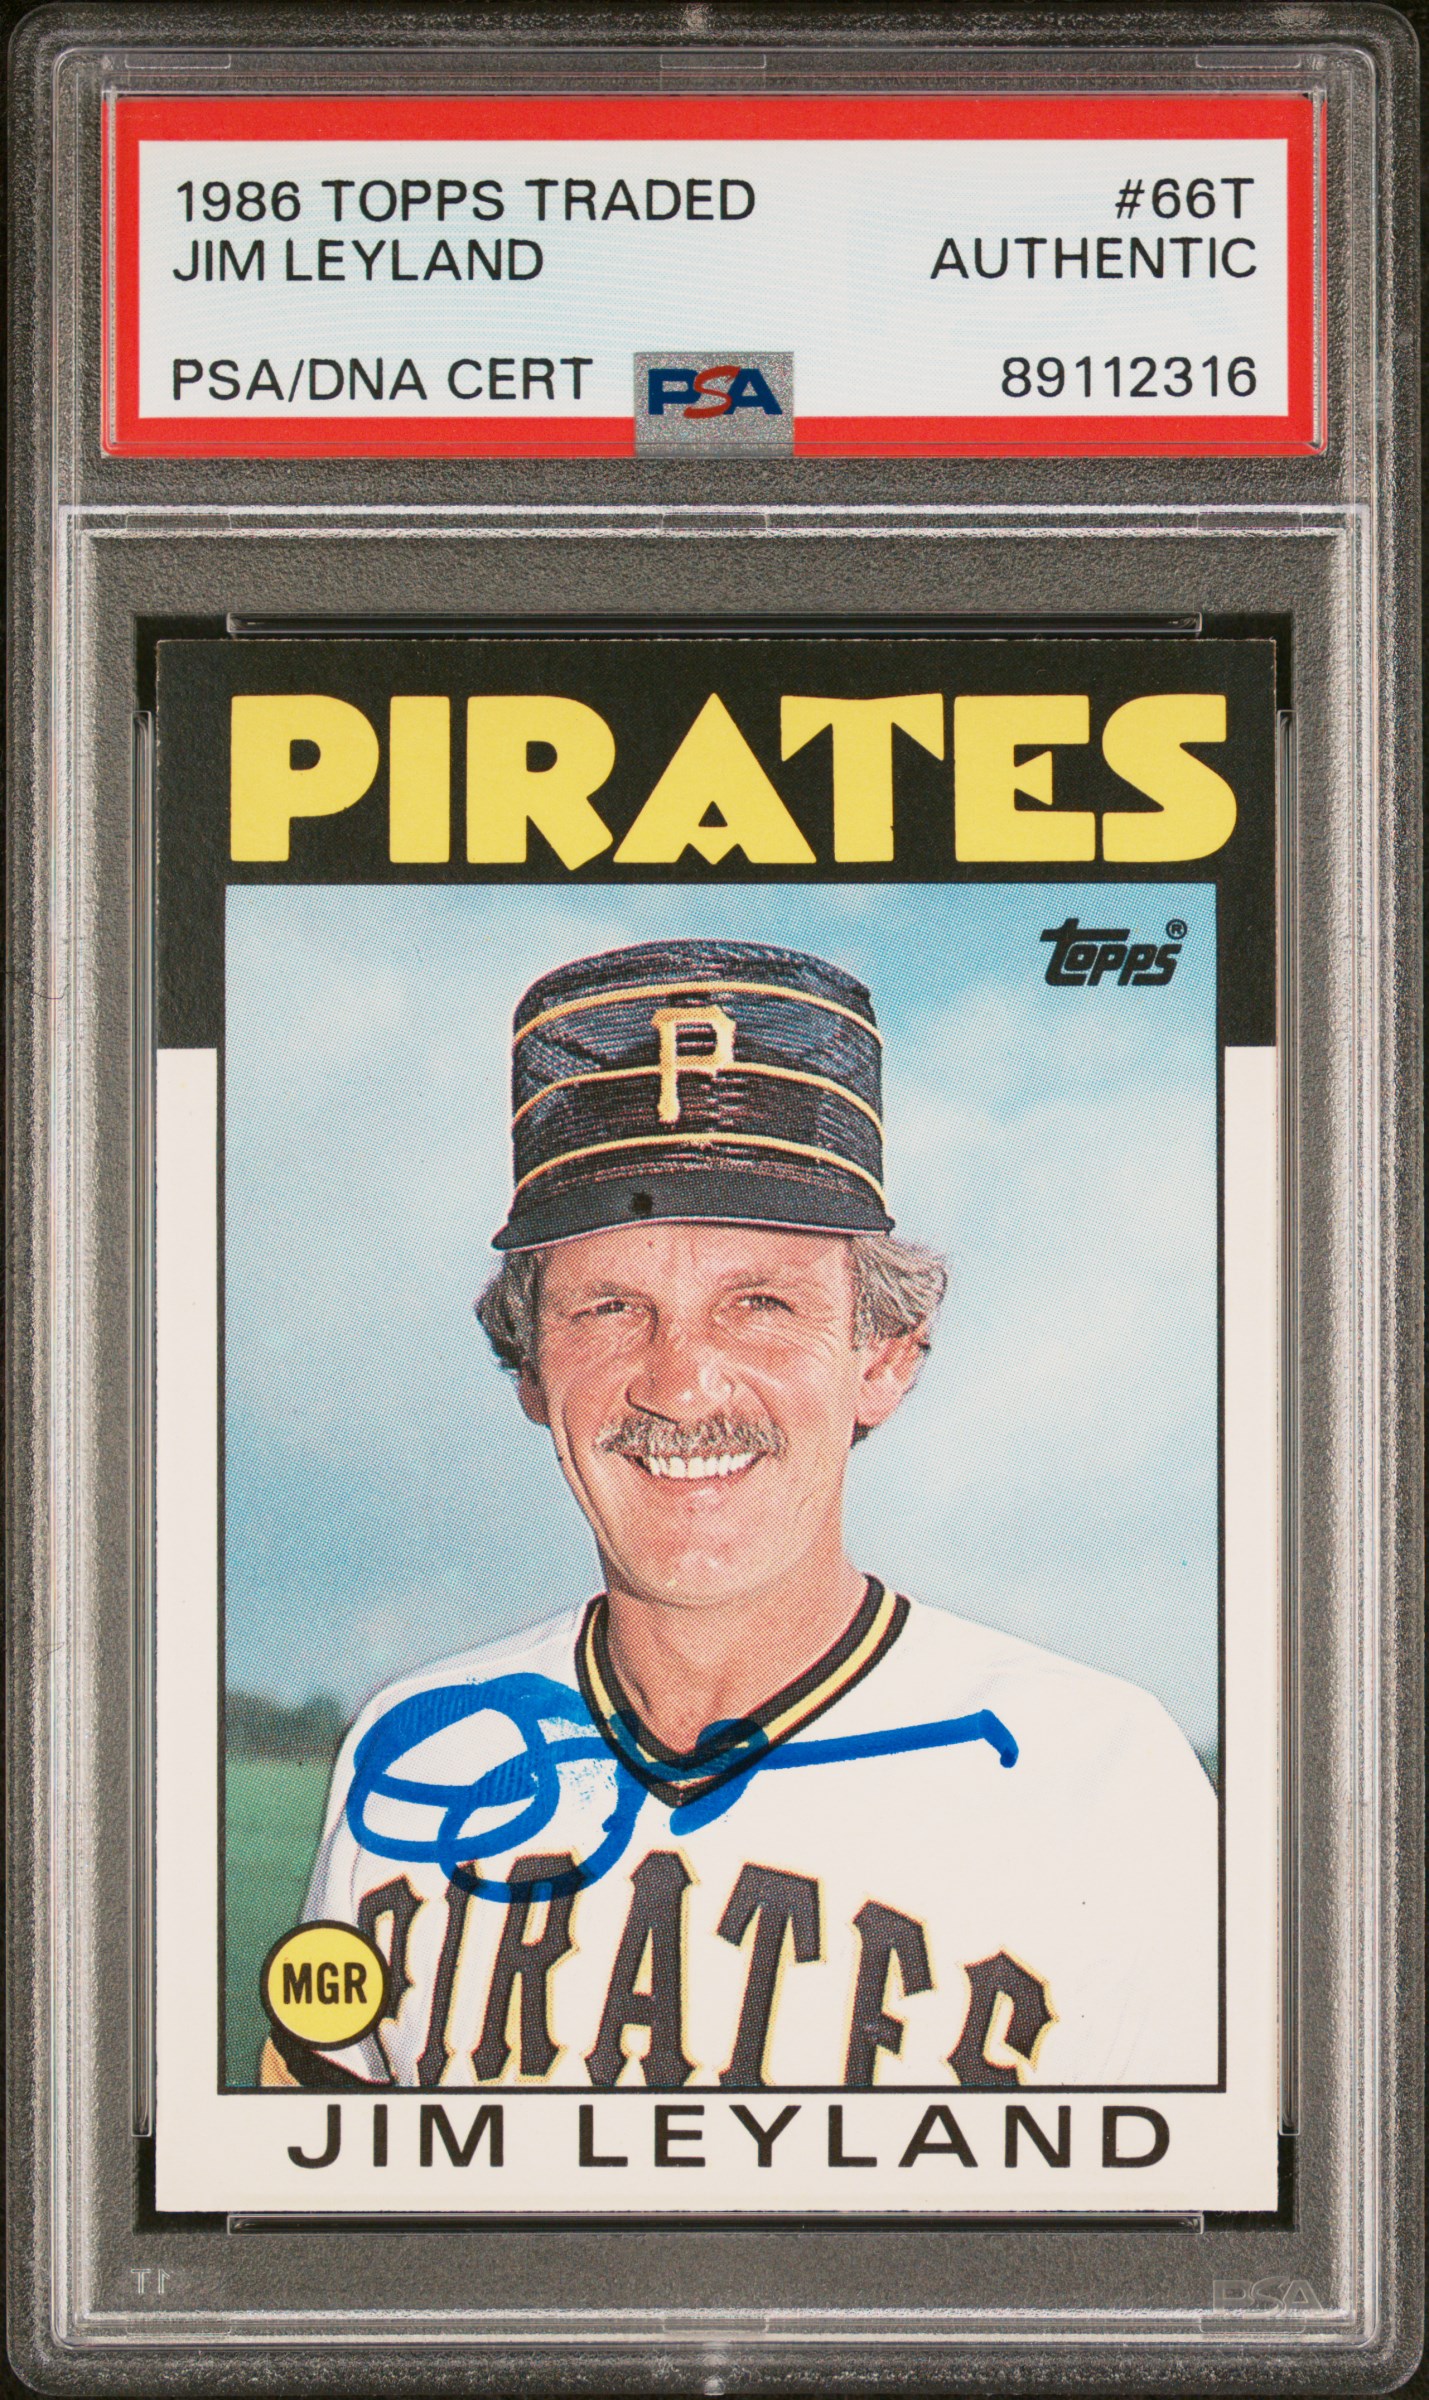 Jim Leyland 1986 Topps Traded Signed Baseball Rookie Card #66T Auto PSA 89112316